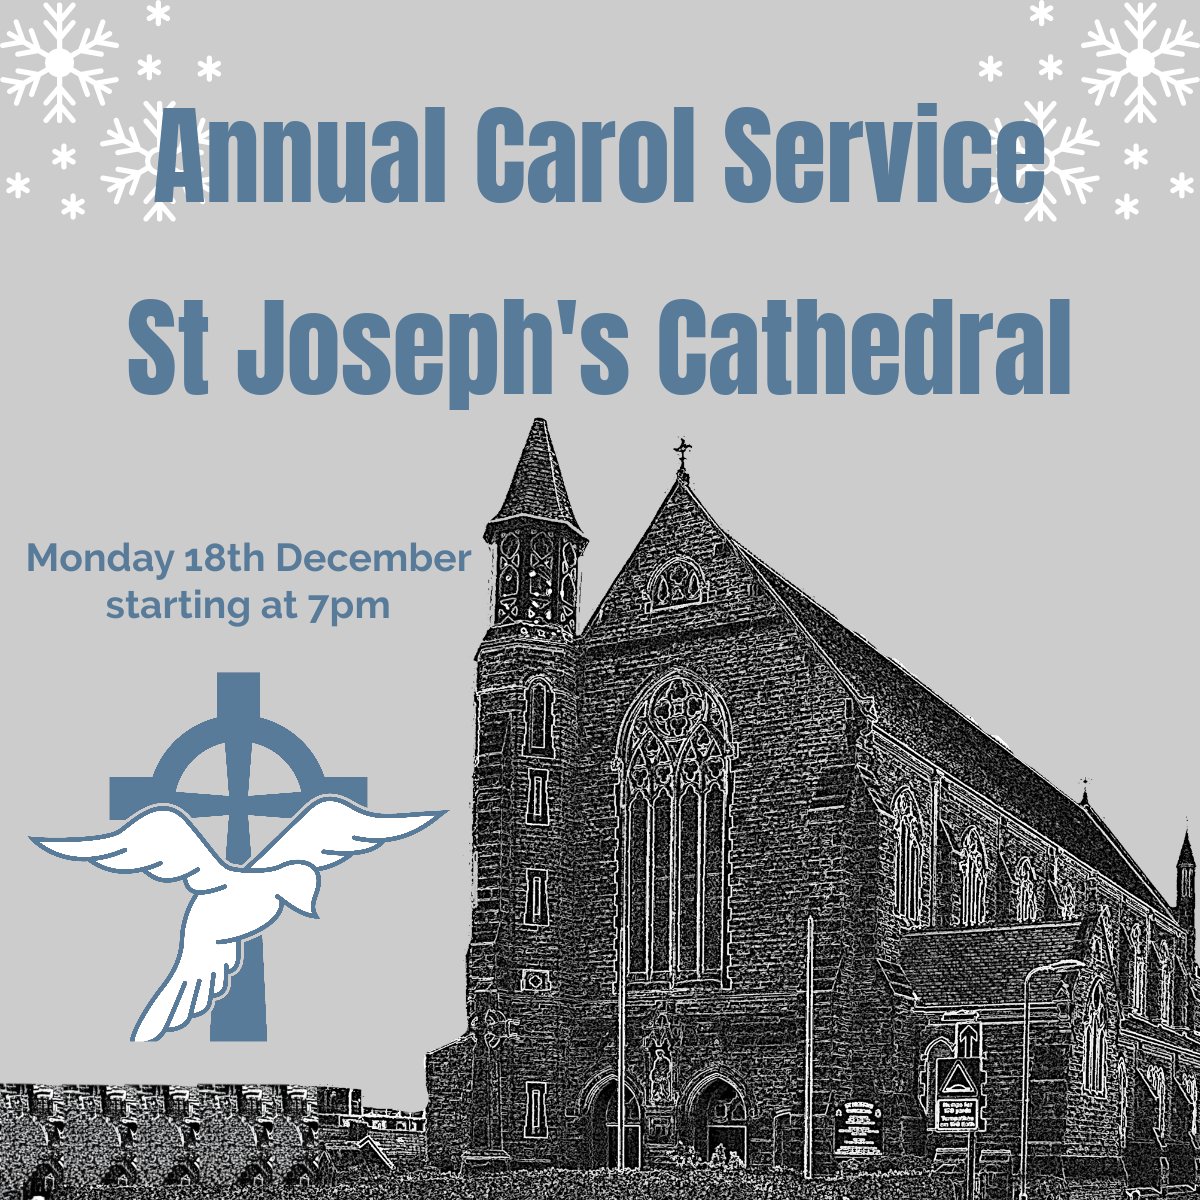 Join us next Monday evening, starting at 7pm, for our annual Carol Service at St Joseph's Cathedral! All are welcome!